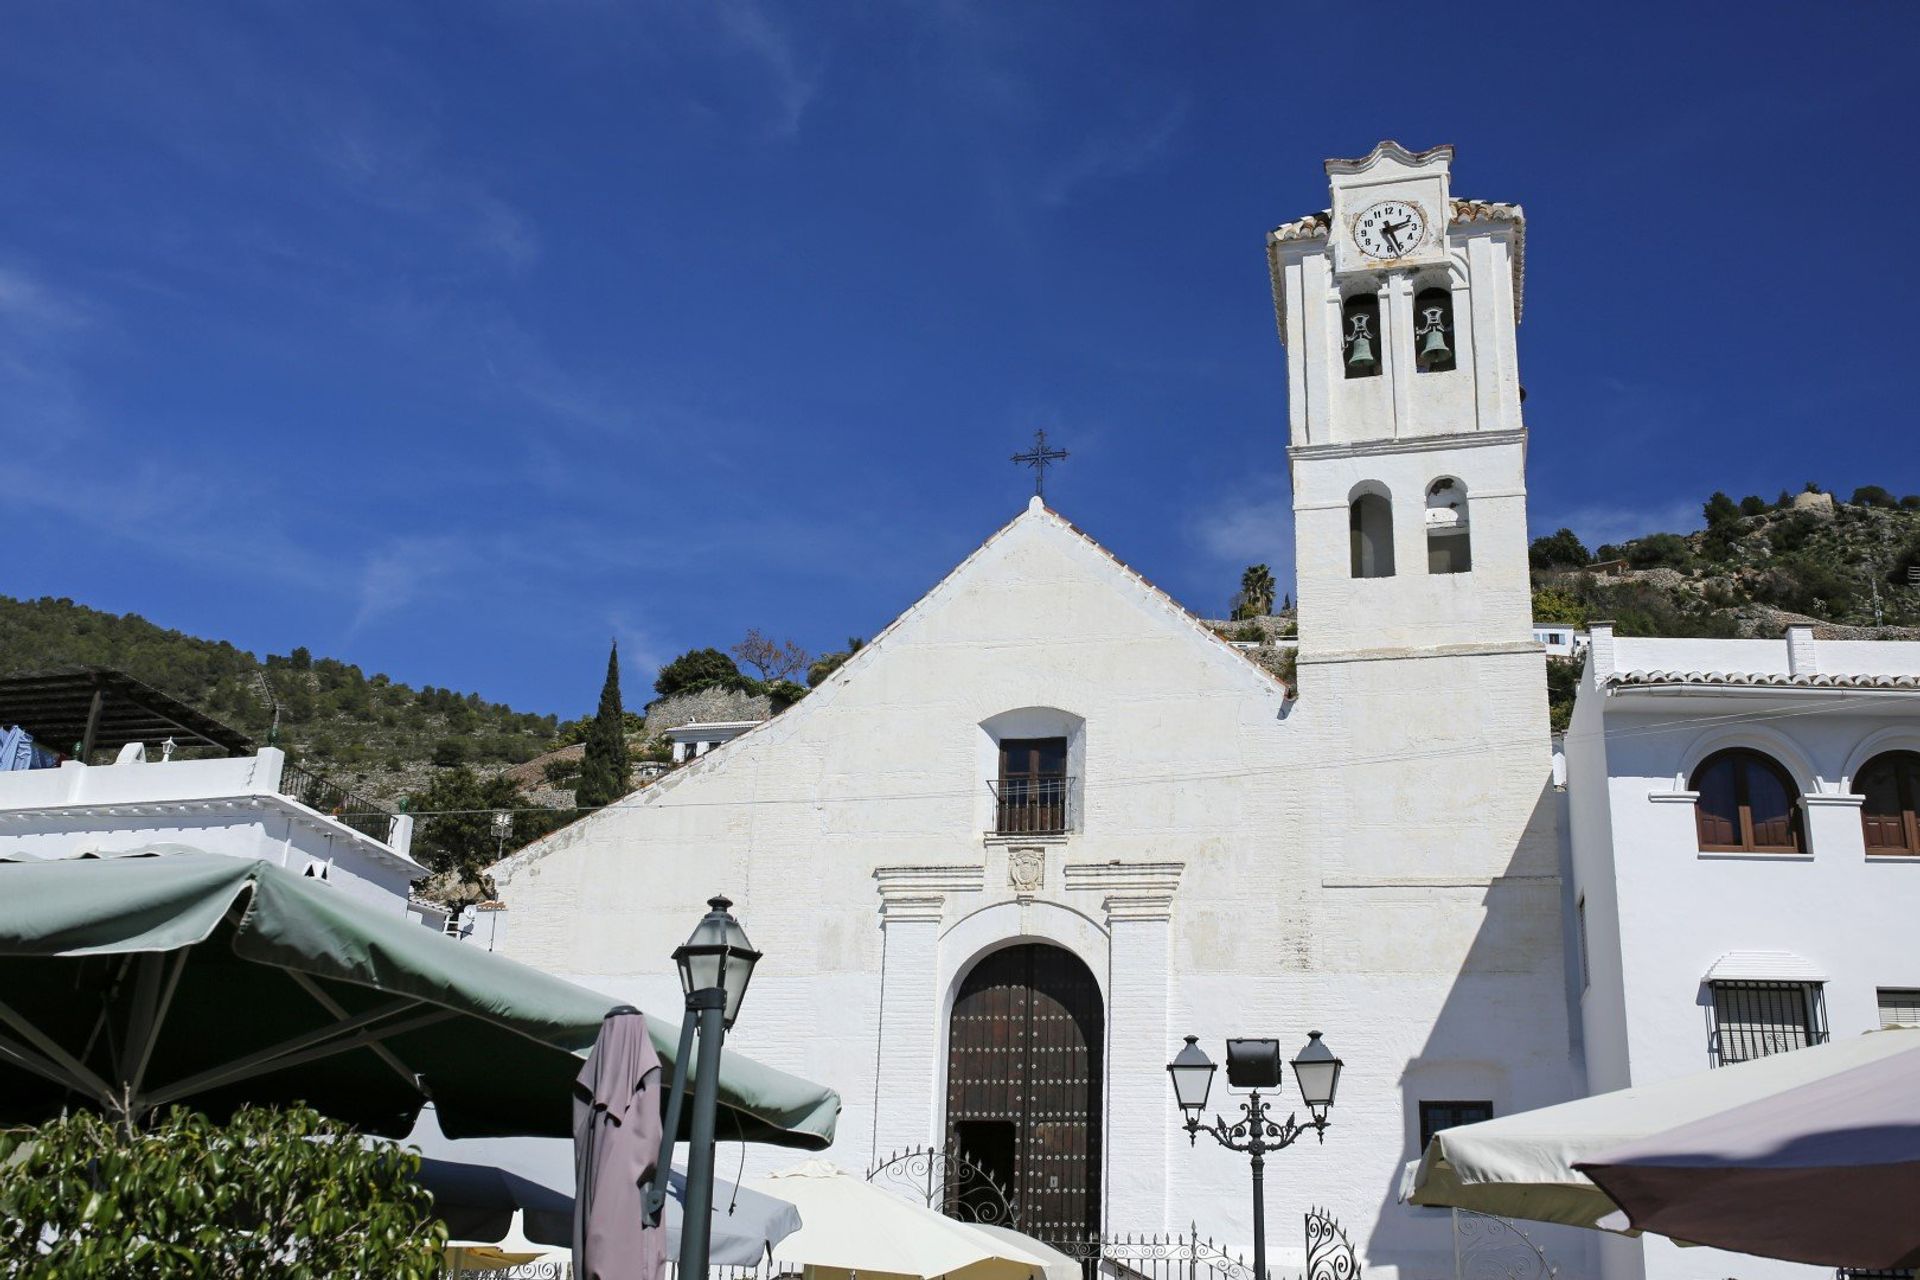 The 17th century chruch of San Antonio de Padua is just one of the many Frigiliana's historical monuments well worth a visit